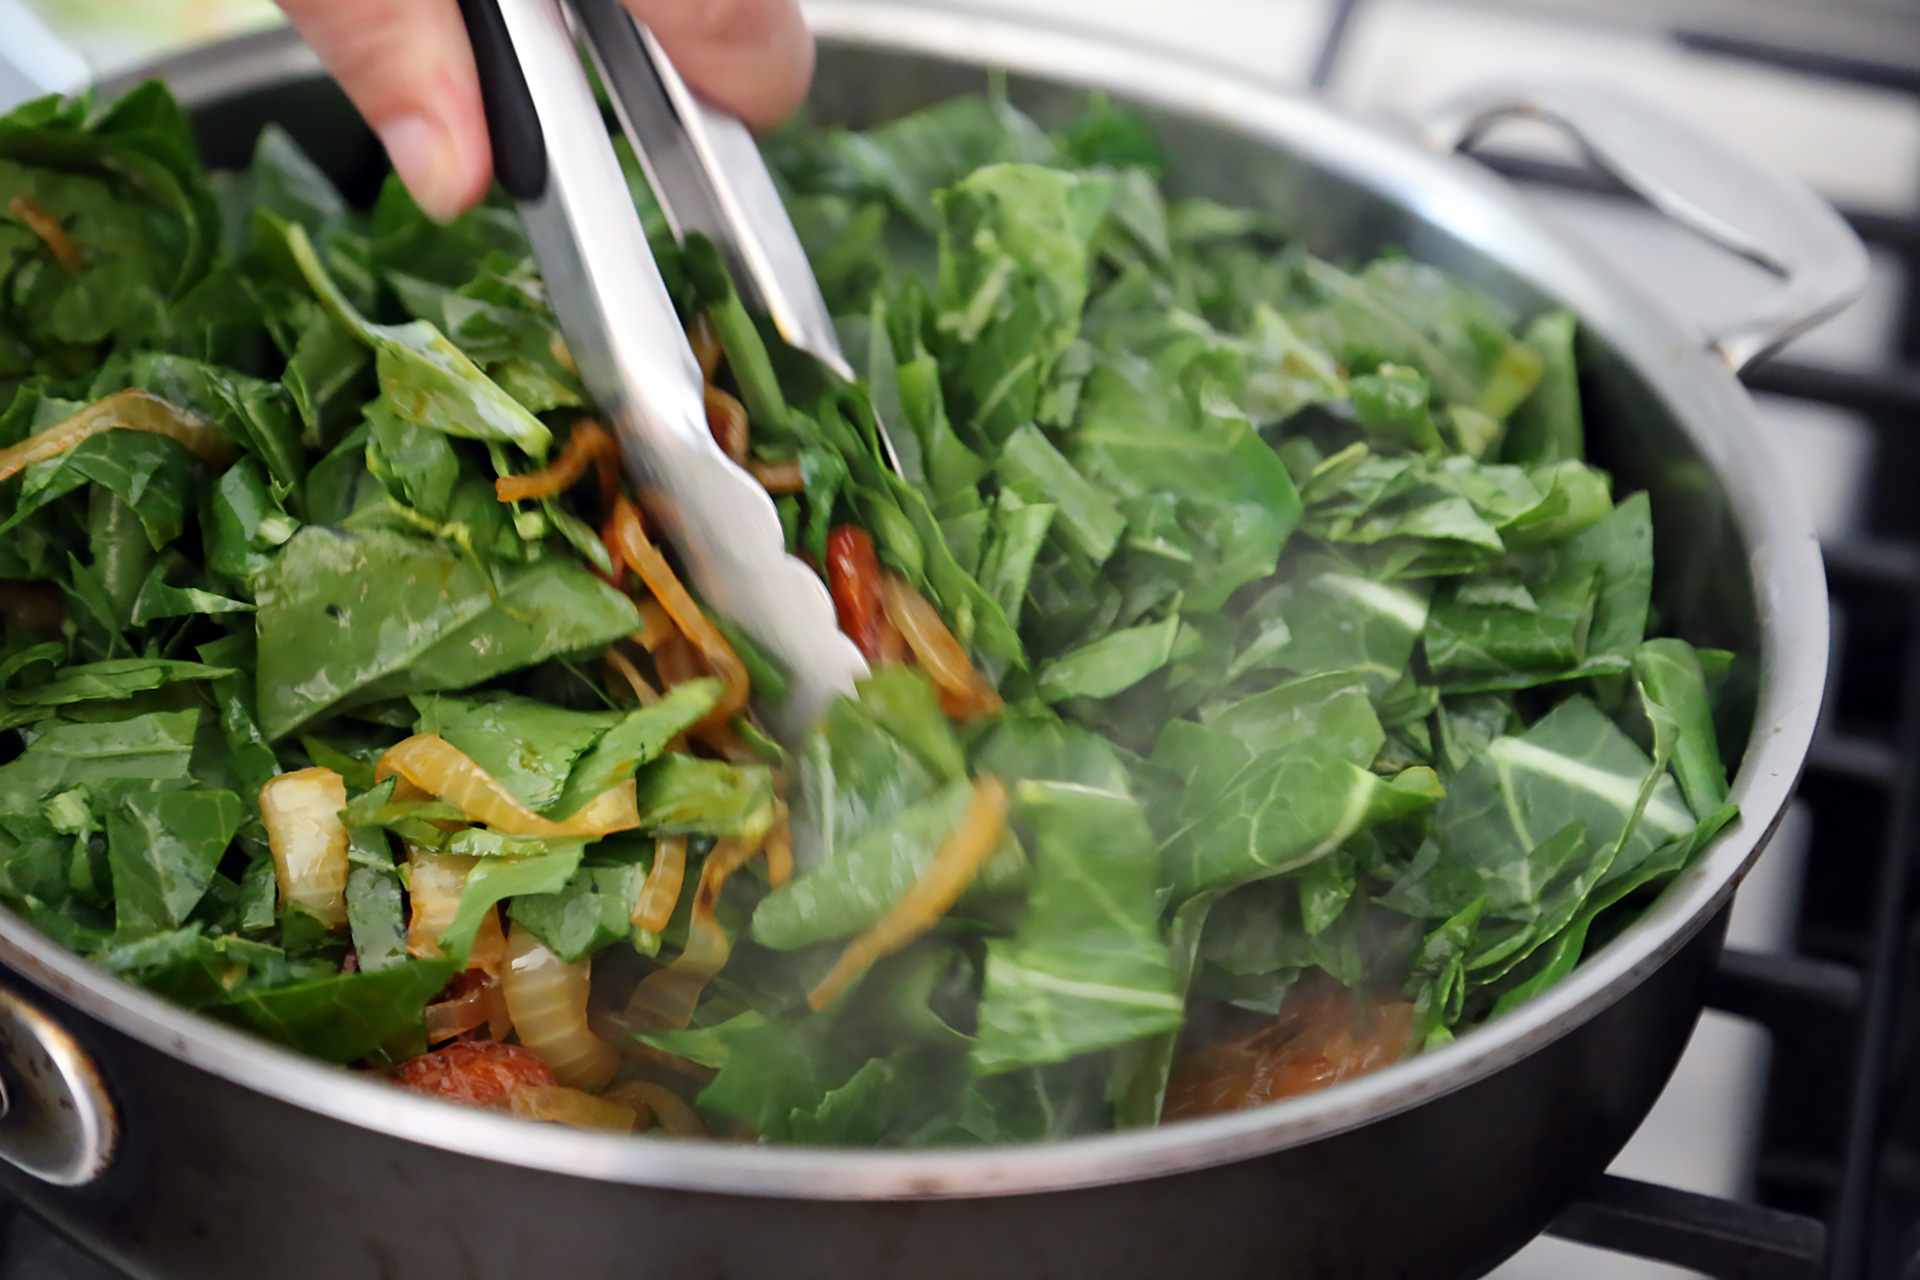 Add the caramelized onions and greens to the pan with the chorizo and stir well to combine.